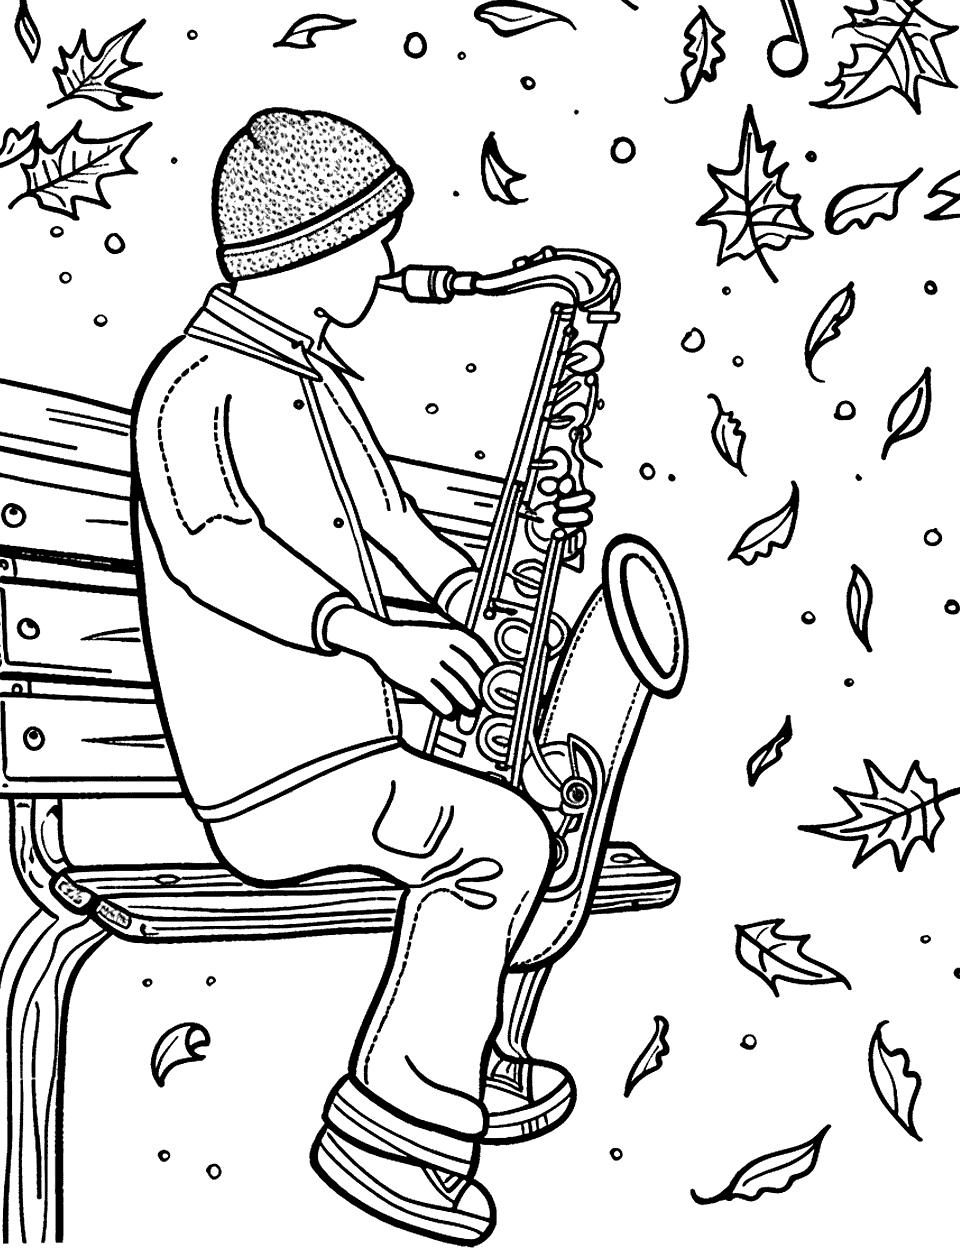 Jazz Saxophone in the Park Music Coloring Page - A teenager playing a saxophone on a park bench with autumn leaves falling around.